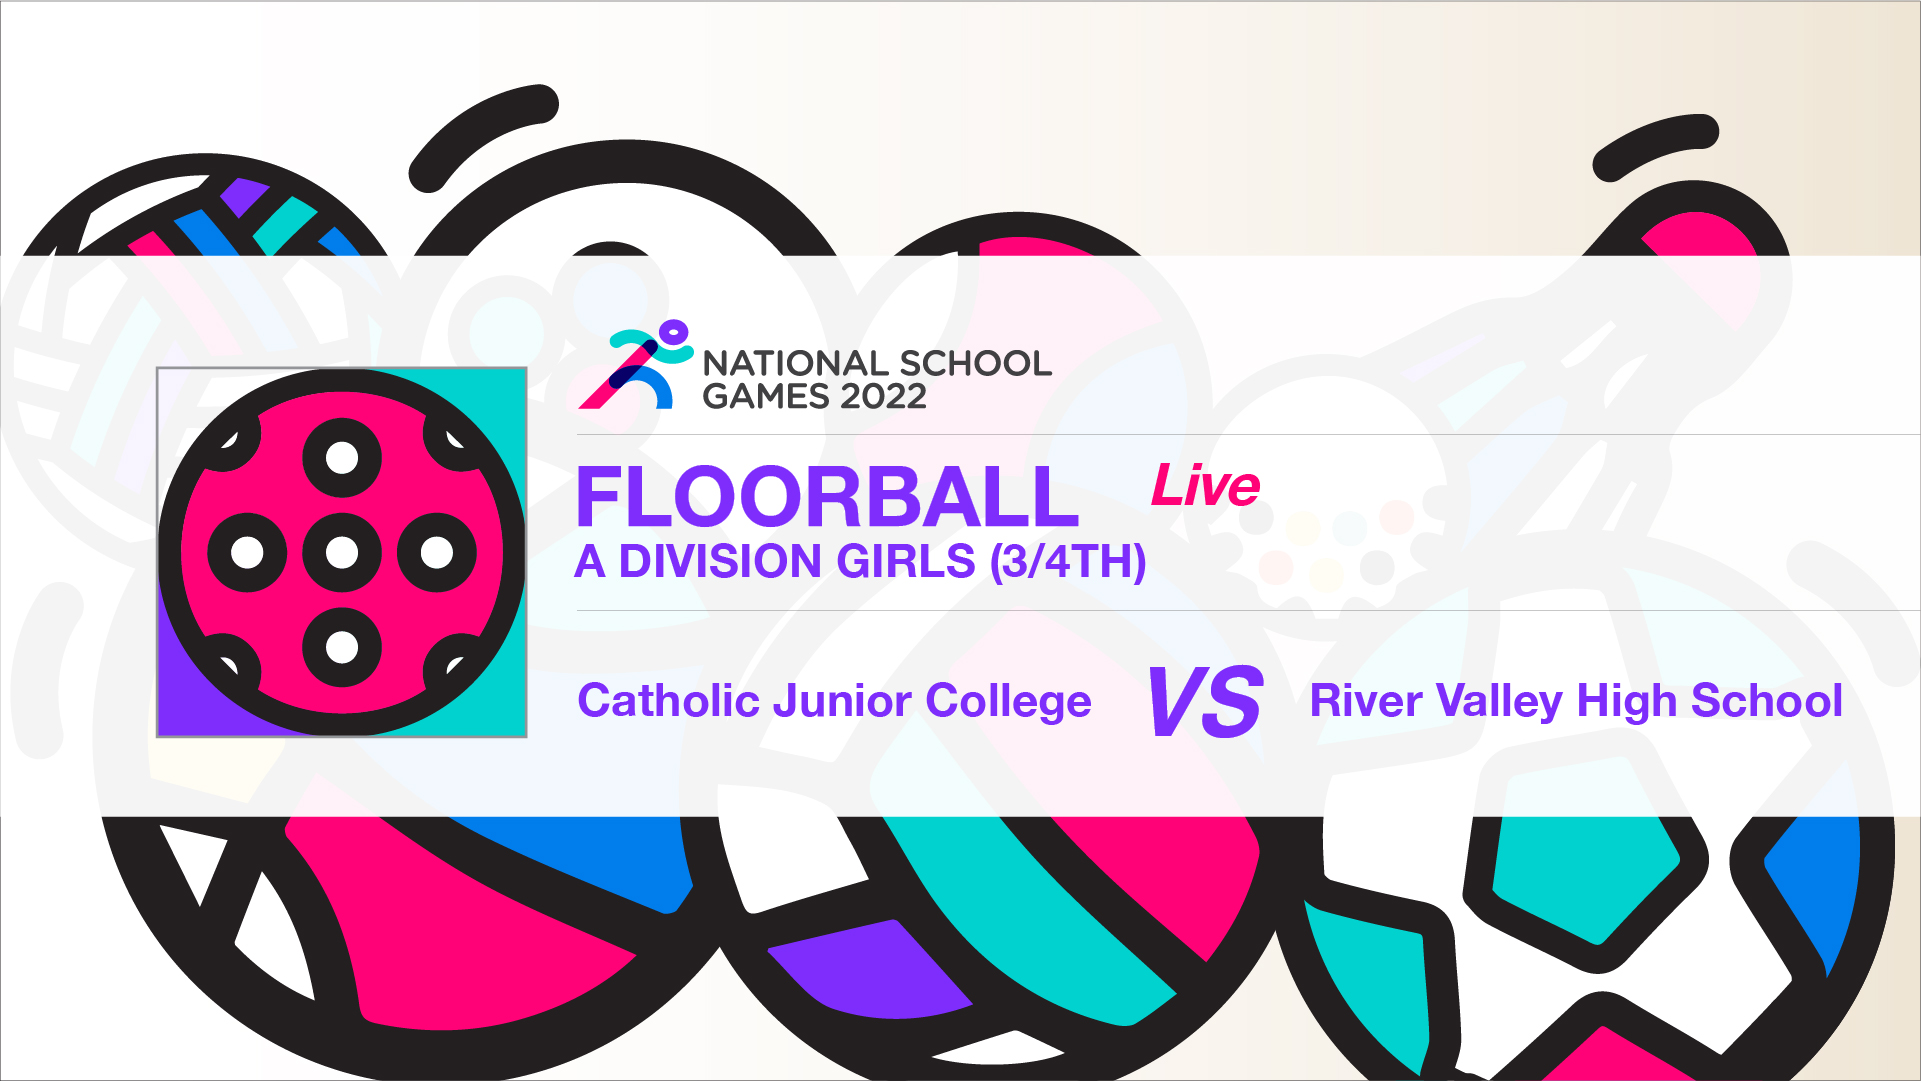 SSSC Floorball A Division Girls 3rd/4th | Catholic Junior College vs River Valley High School